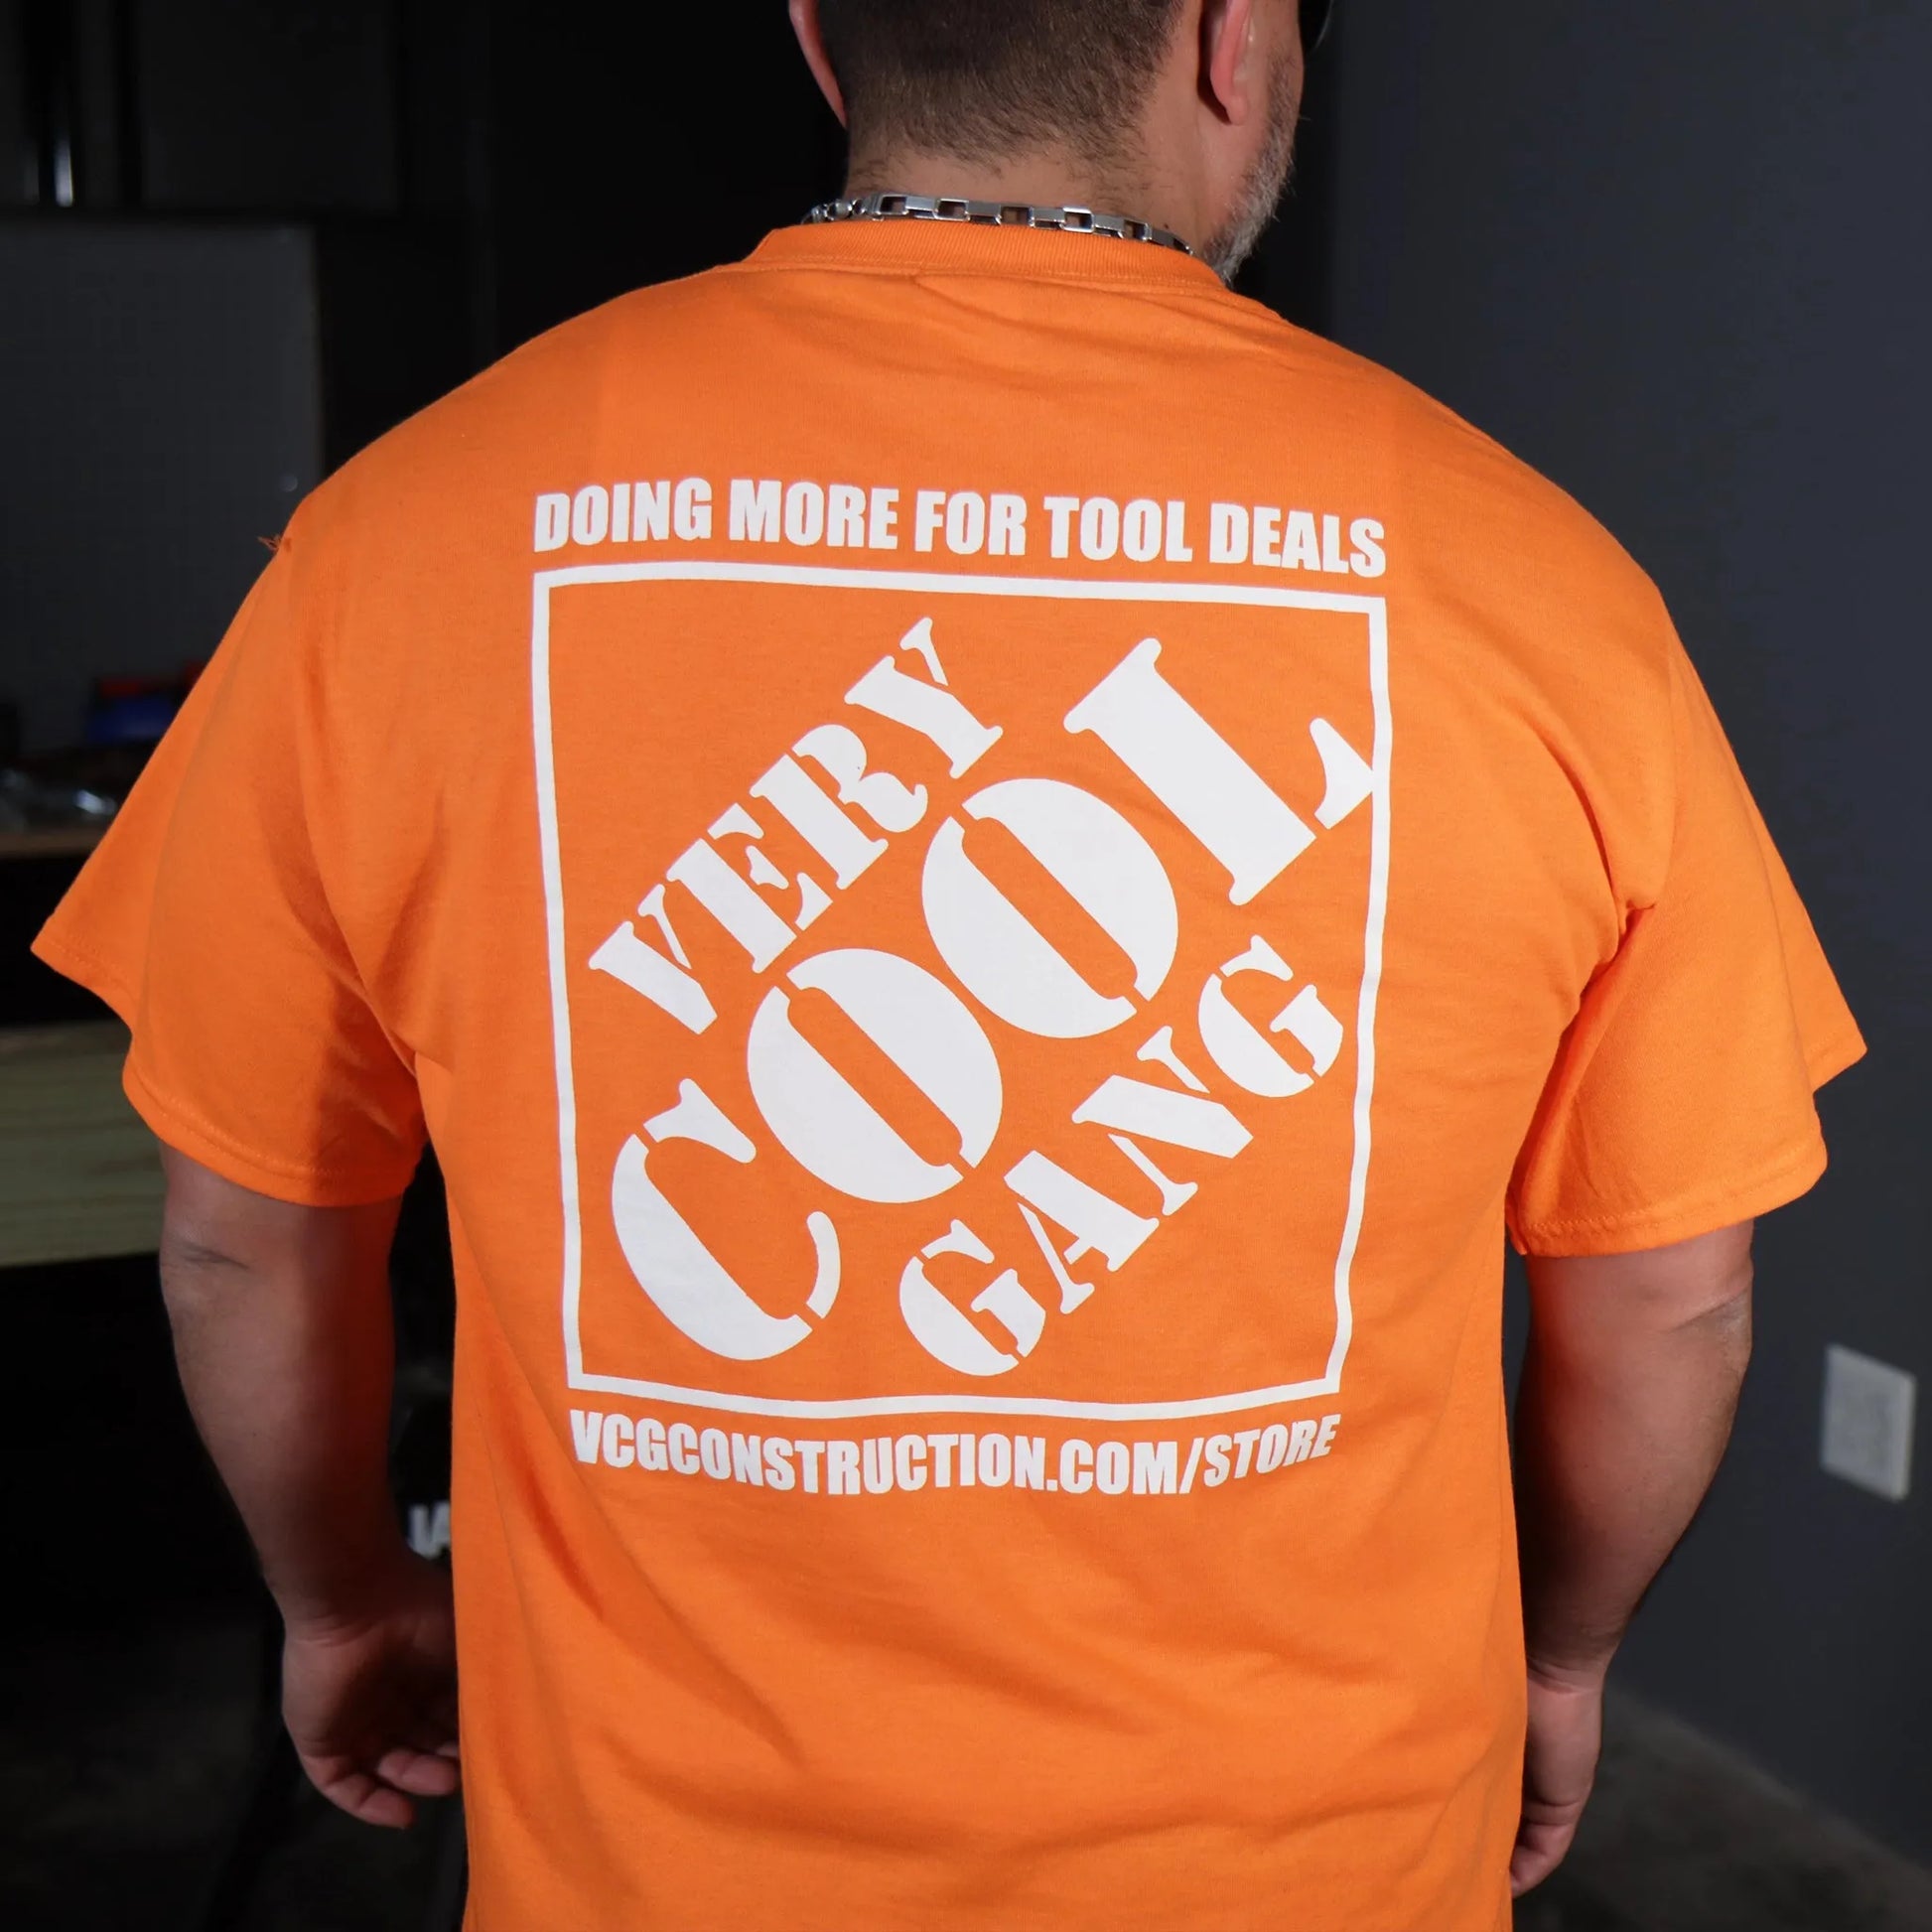 Stand out in our High Visibility Orange shirt featuring the striking 'Very Cool Gang Doing More for Tool Deals' logo prominently displayed in white on the back